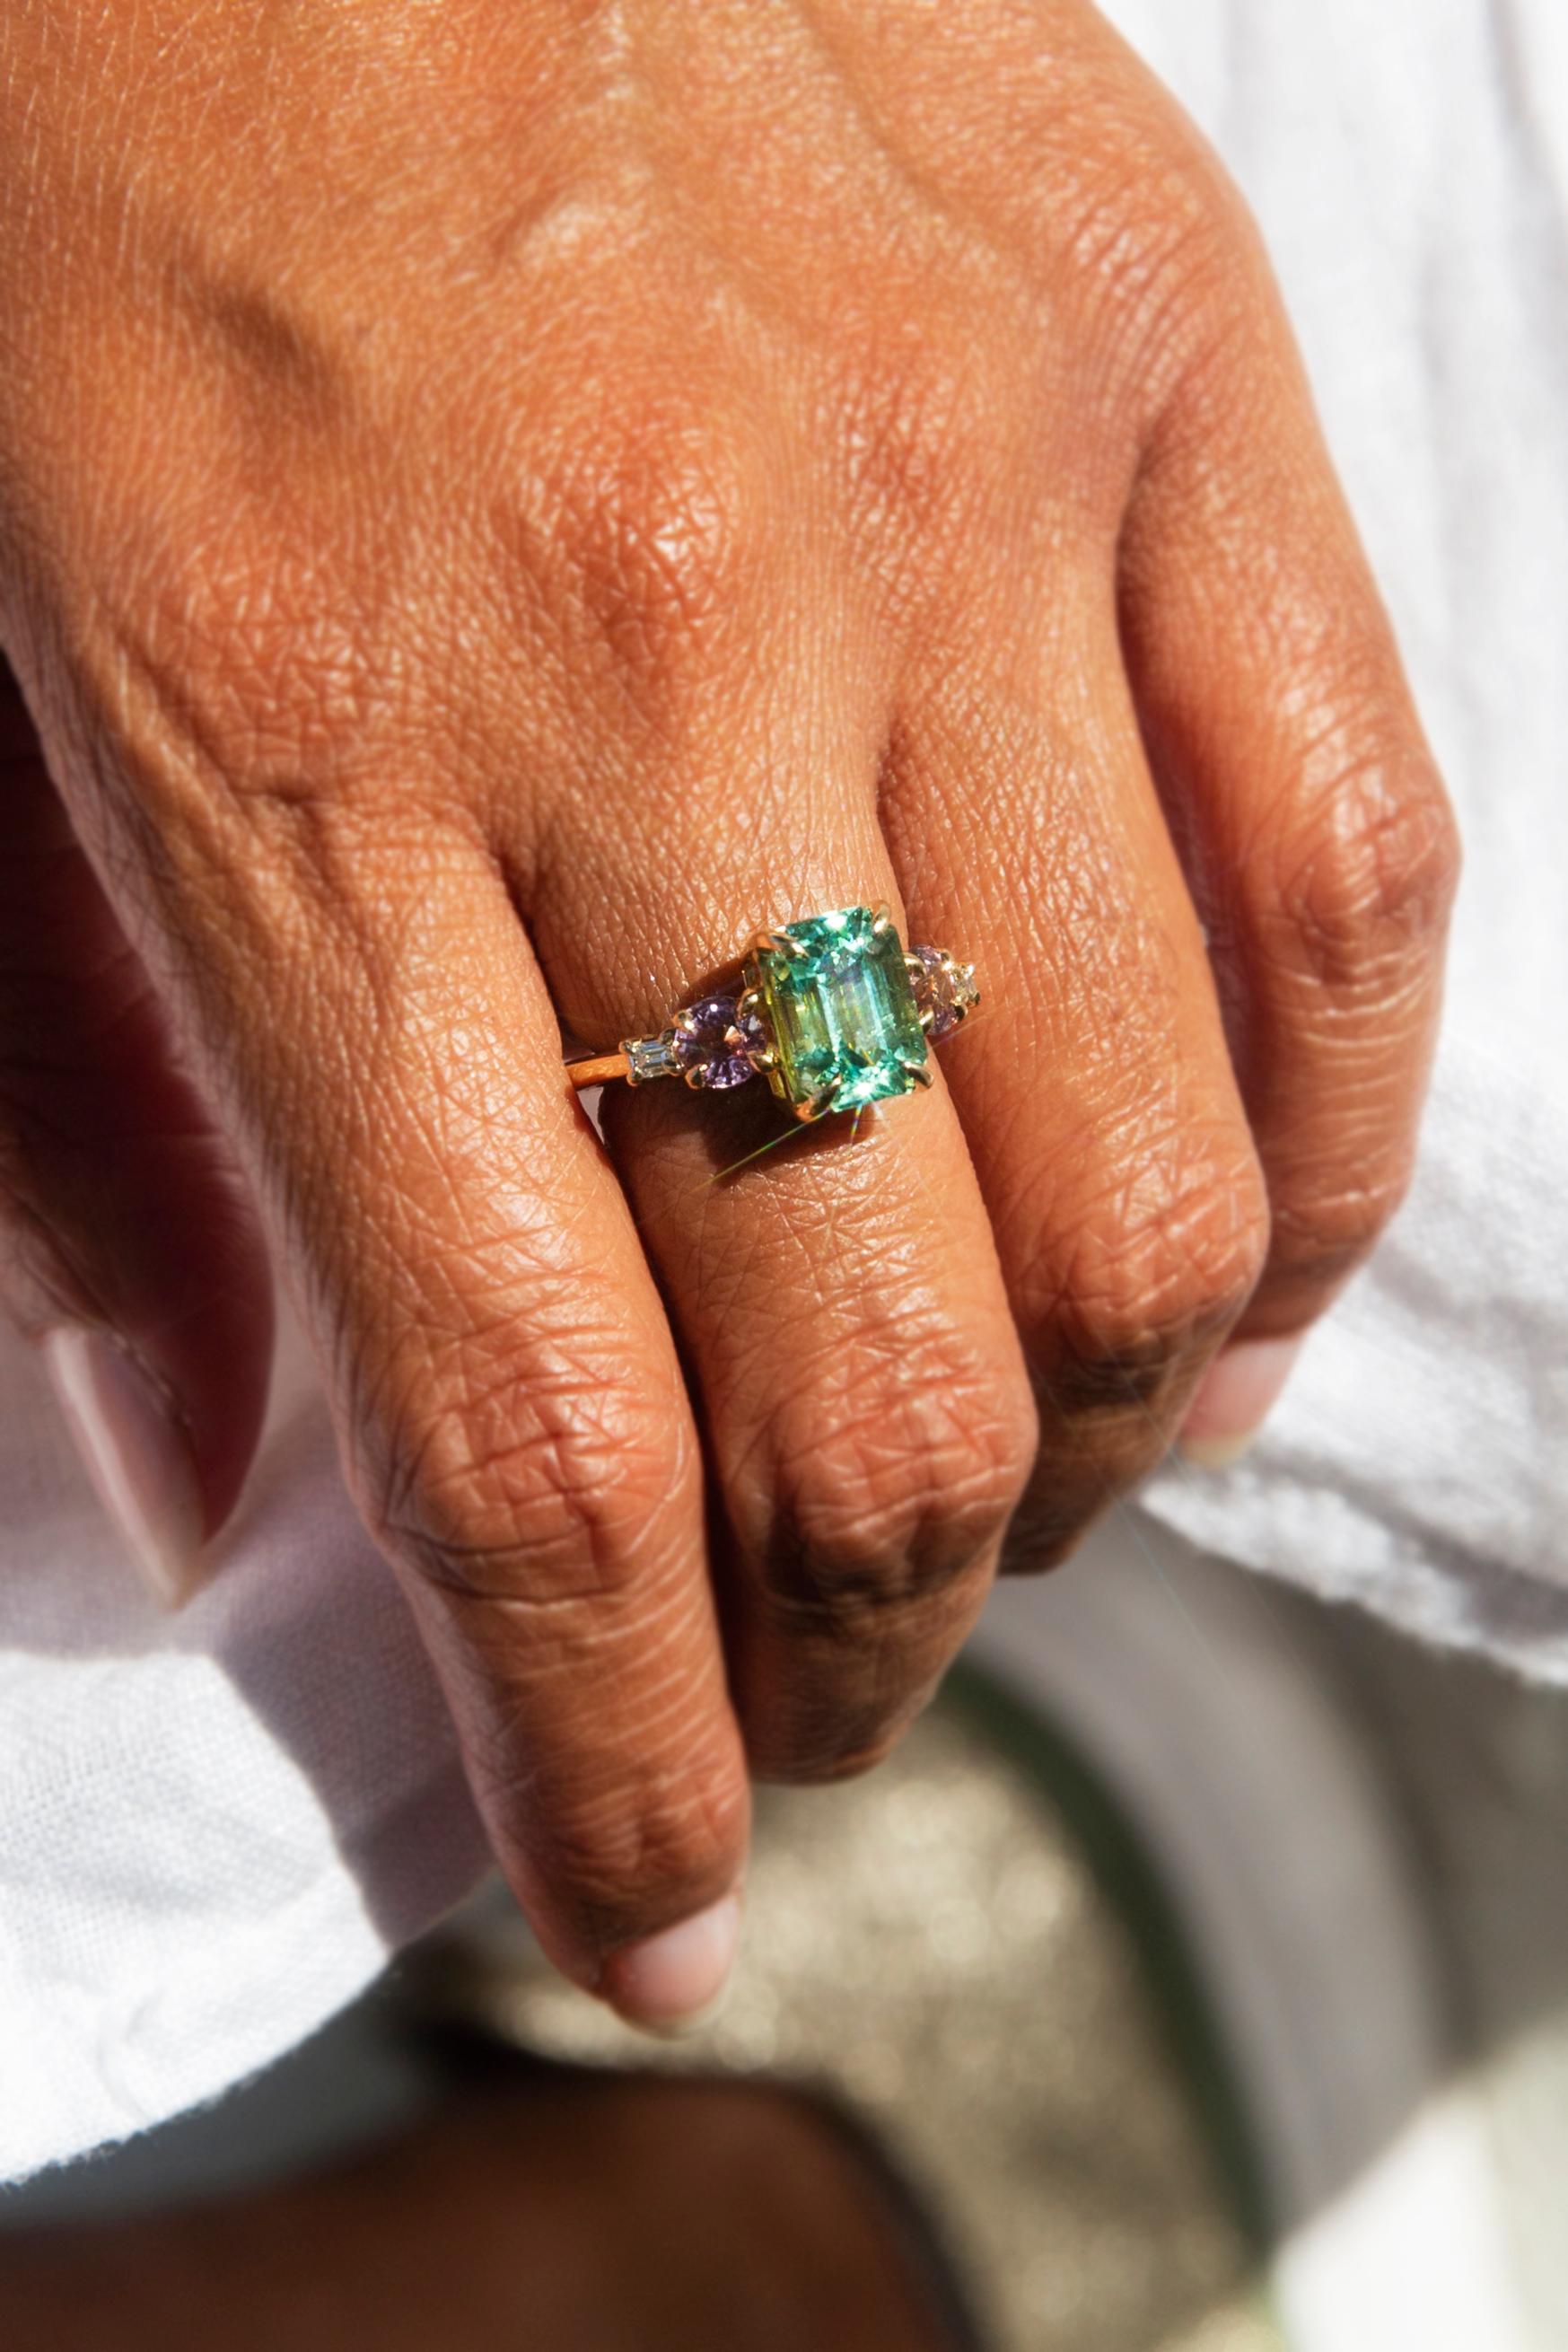 Forged in 18 carat yellow gold, this contemporary wonder features a gorgeous 3.80-carat emerald cut mint green tourmaline flanked by two alluring round pink spinels and two scintillating round brilliant cut diamonds. We have named this fabulous